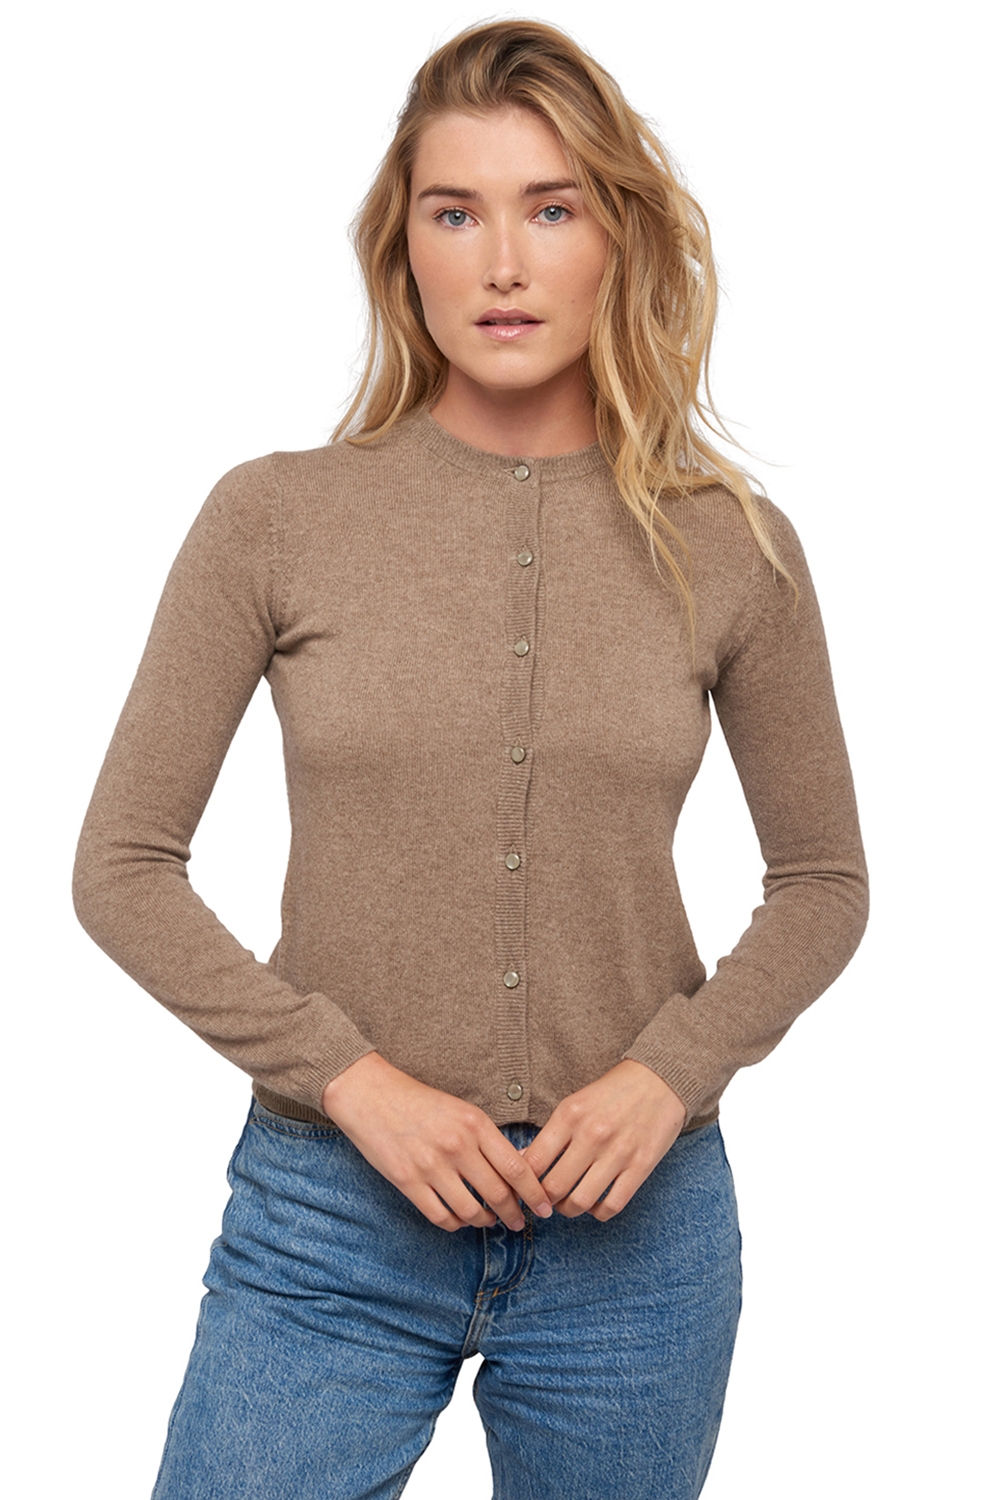 Cashmere ladies timeless classics chloe natural brown 4xl